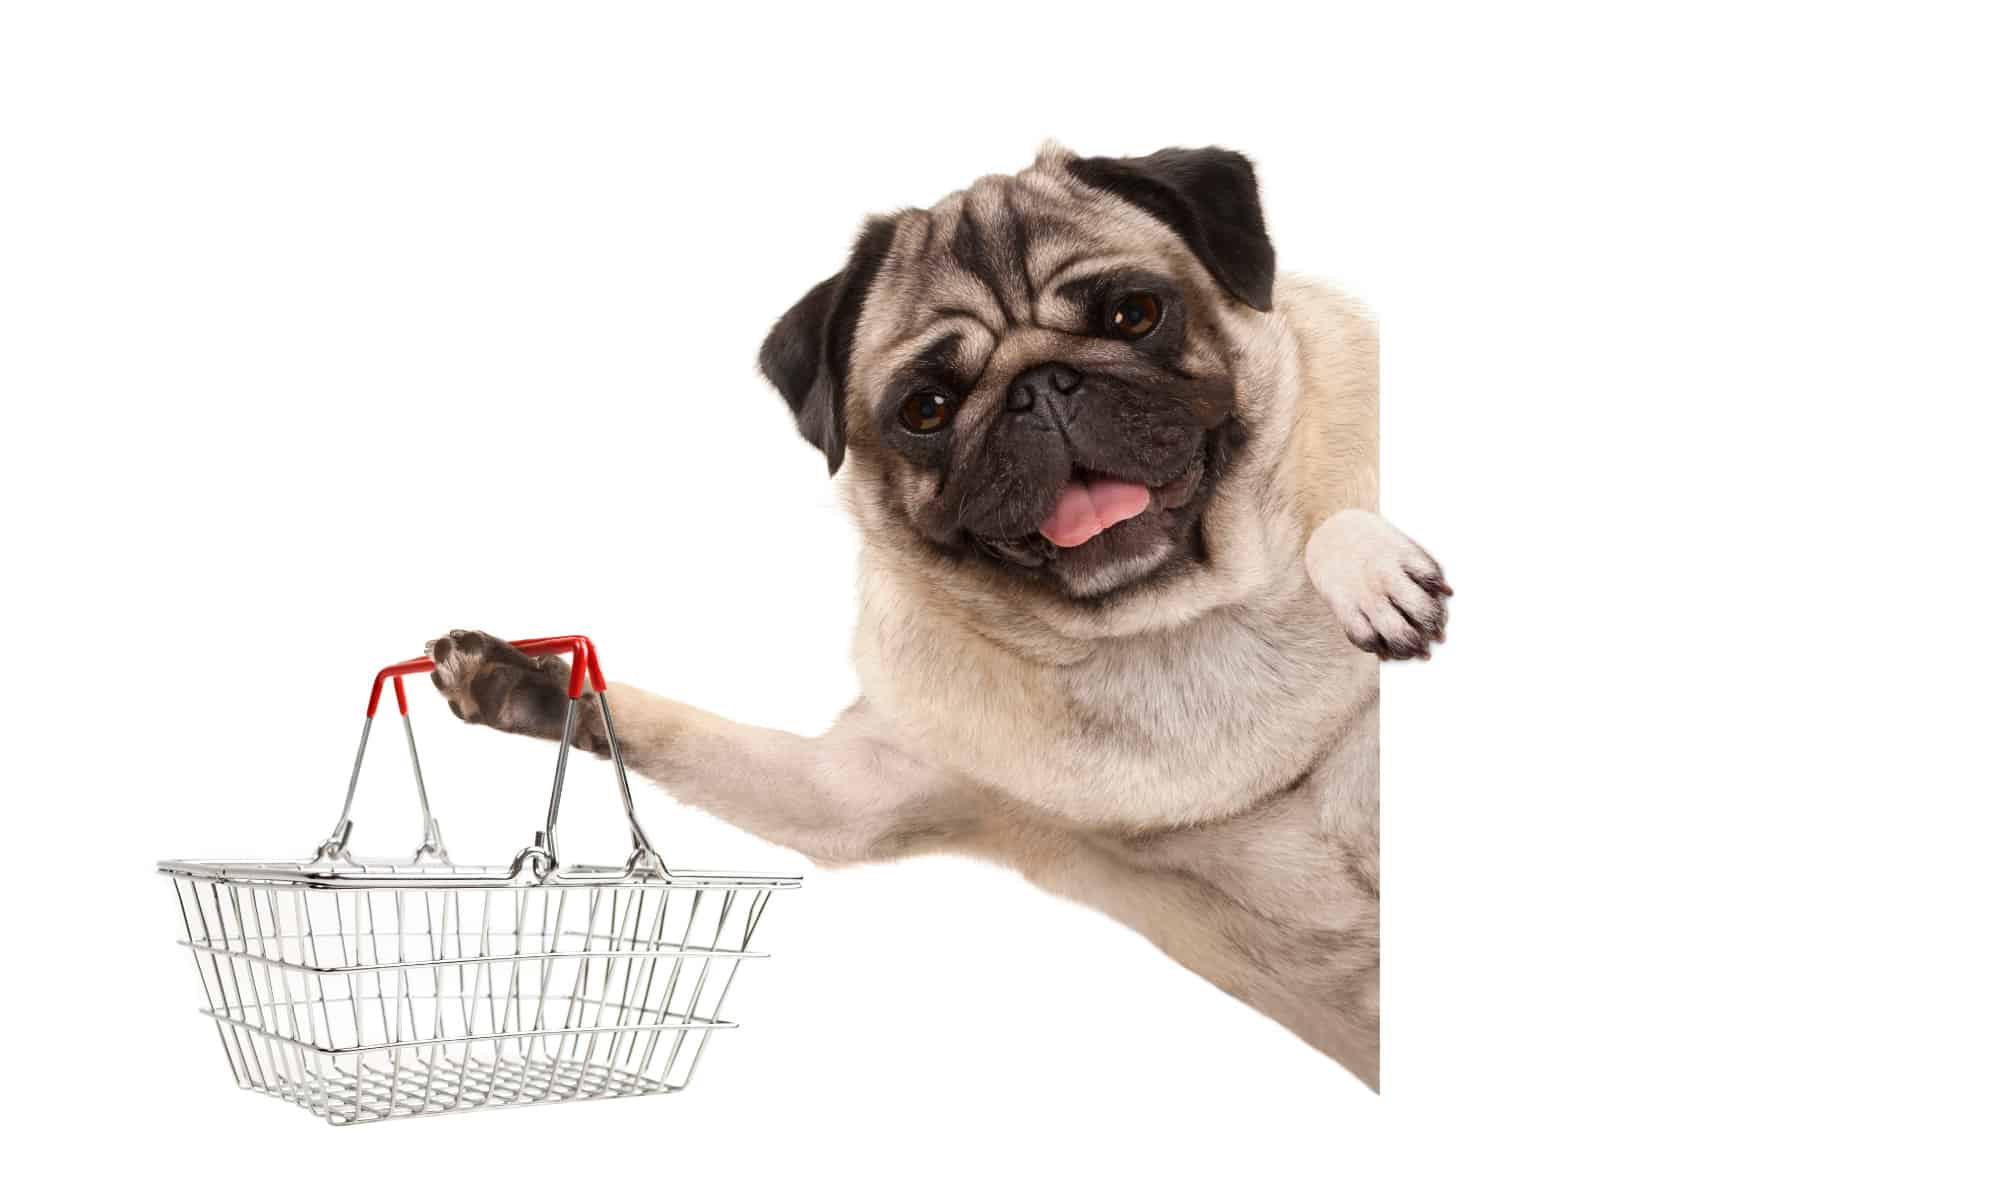 Happy pug holding a wire shopping basket on one paw against a white background